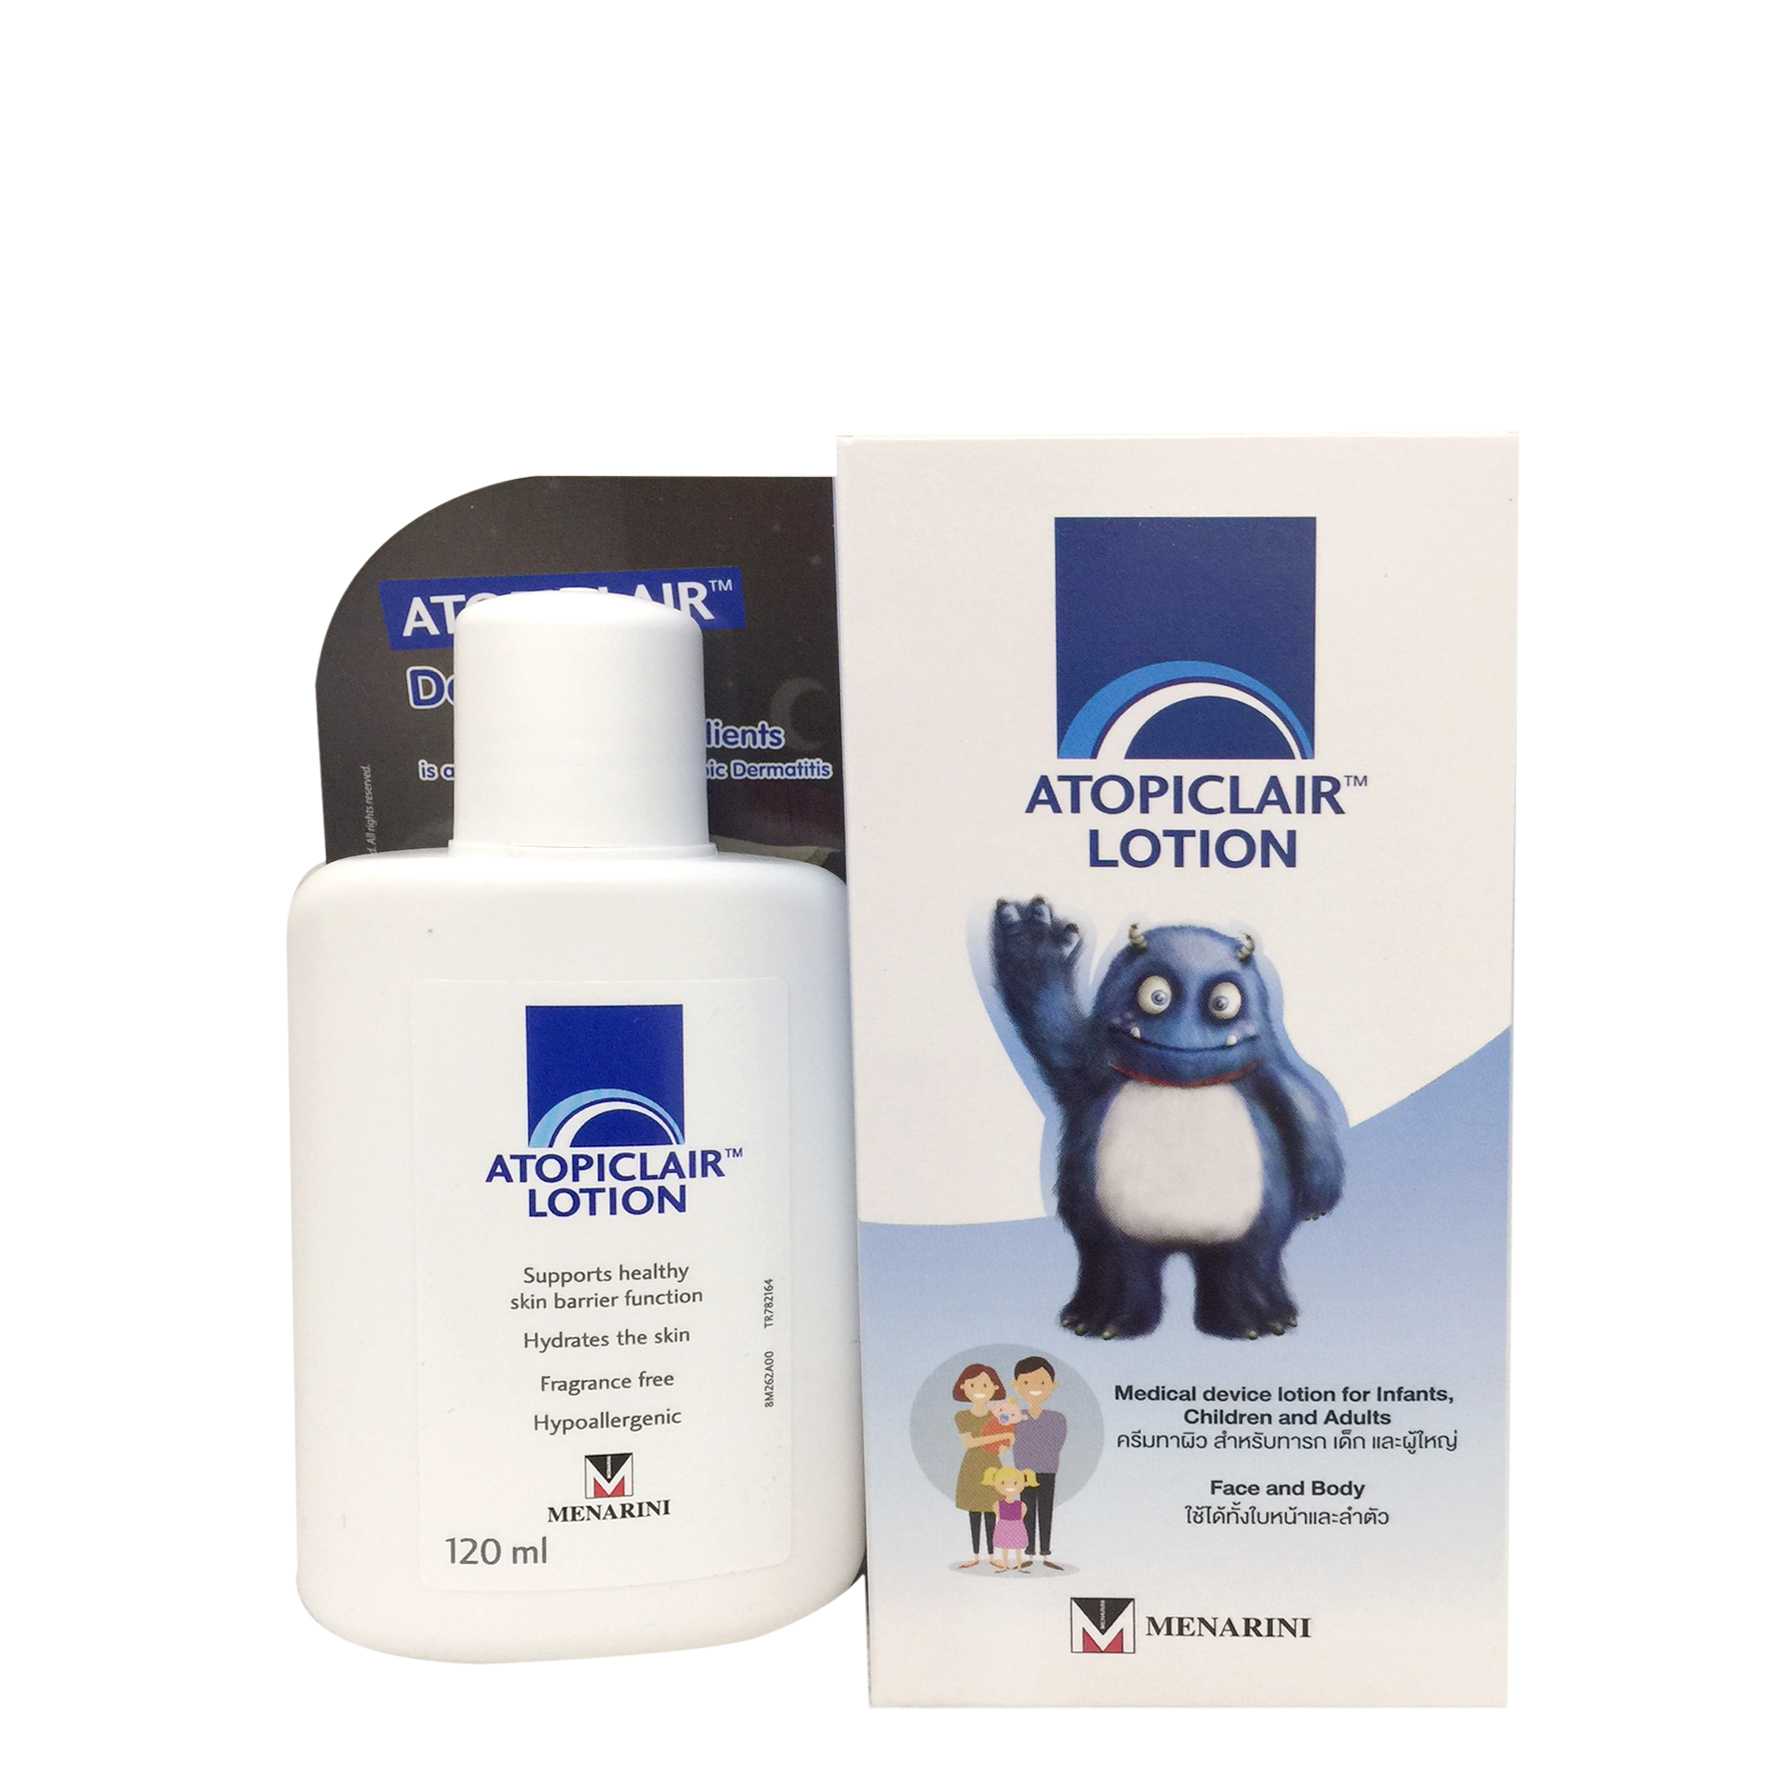 Atopiclair lotion